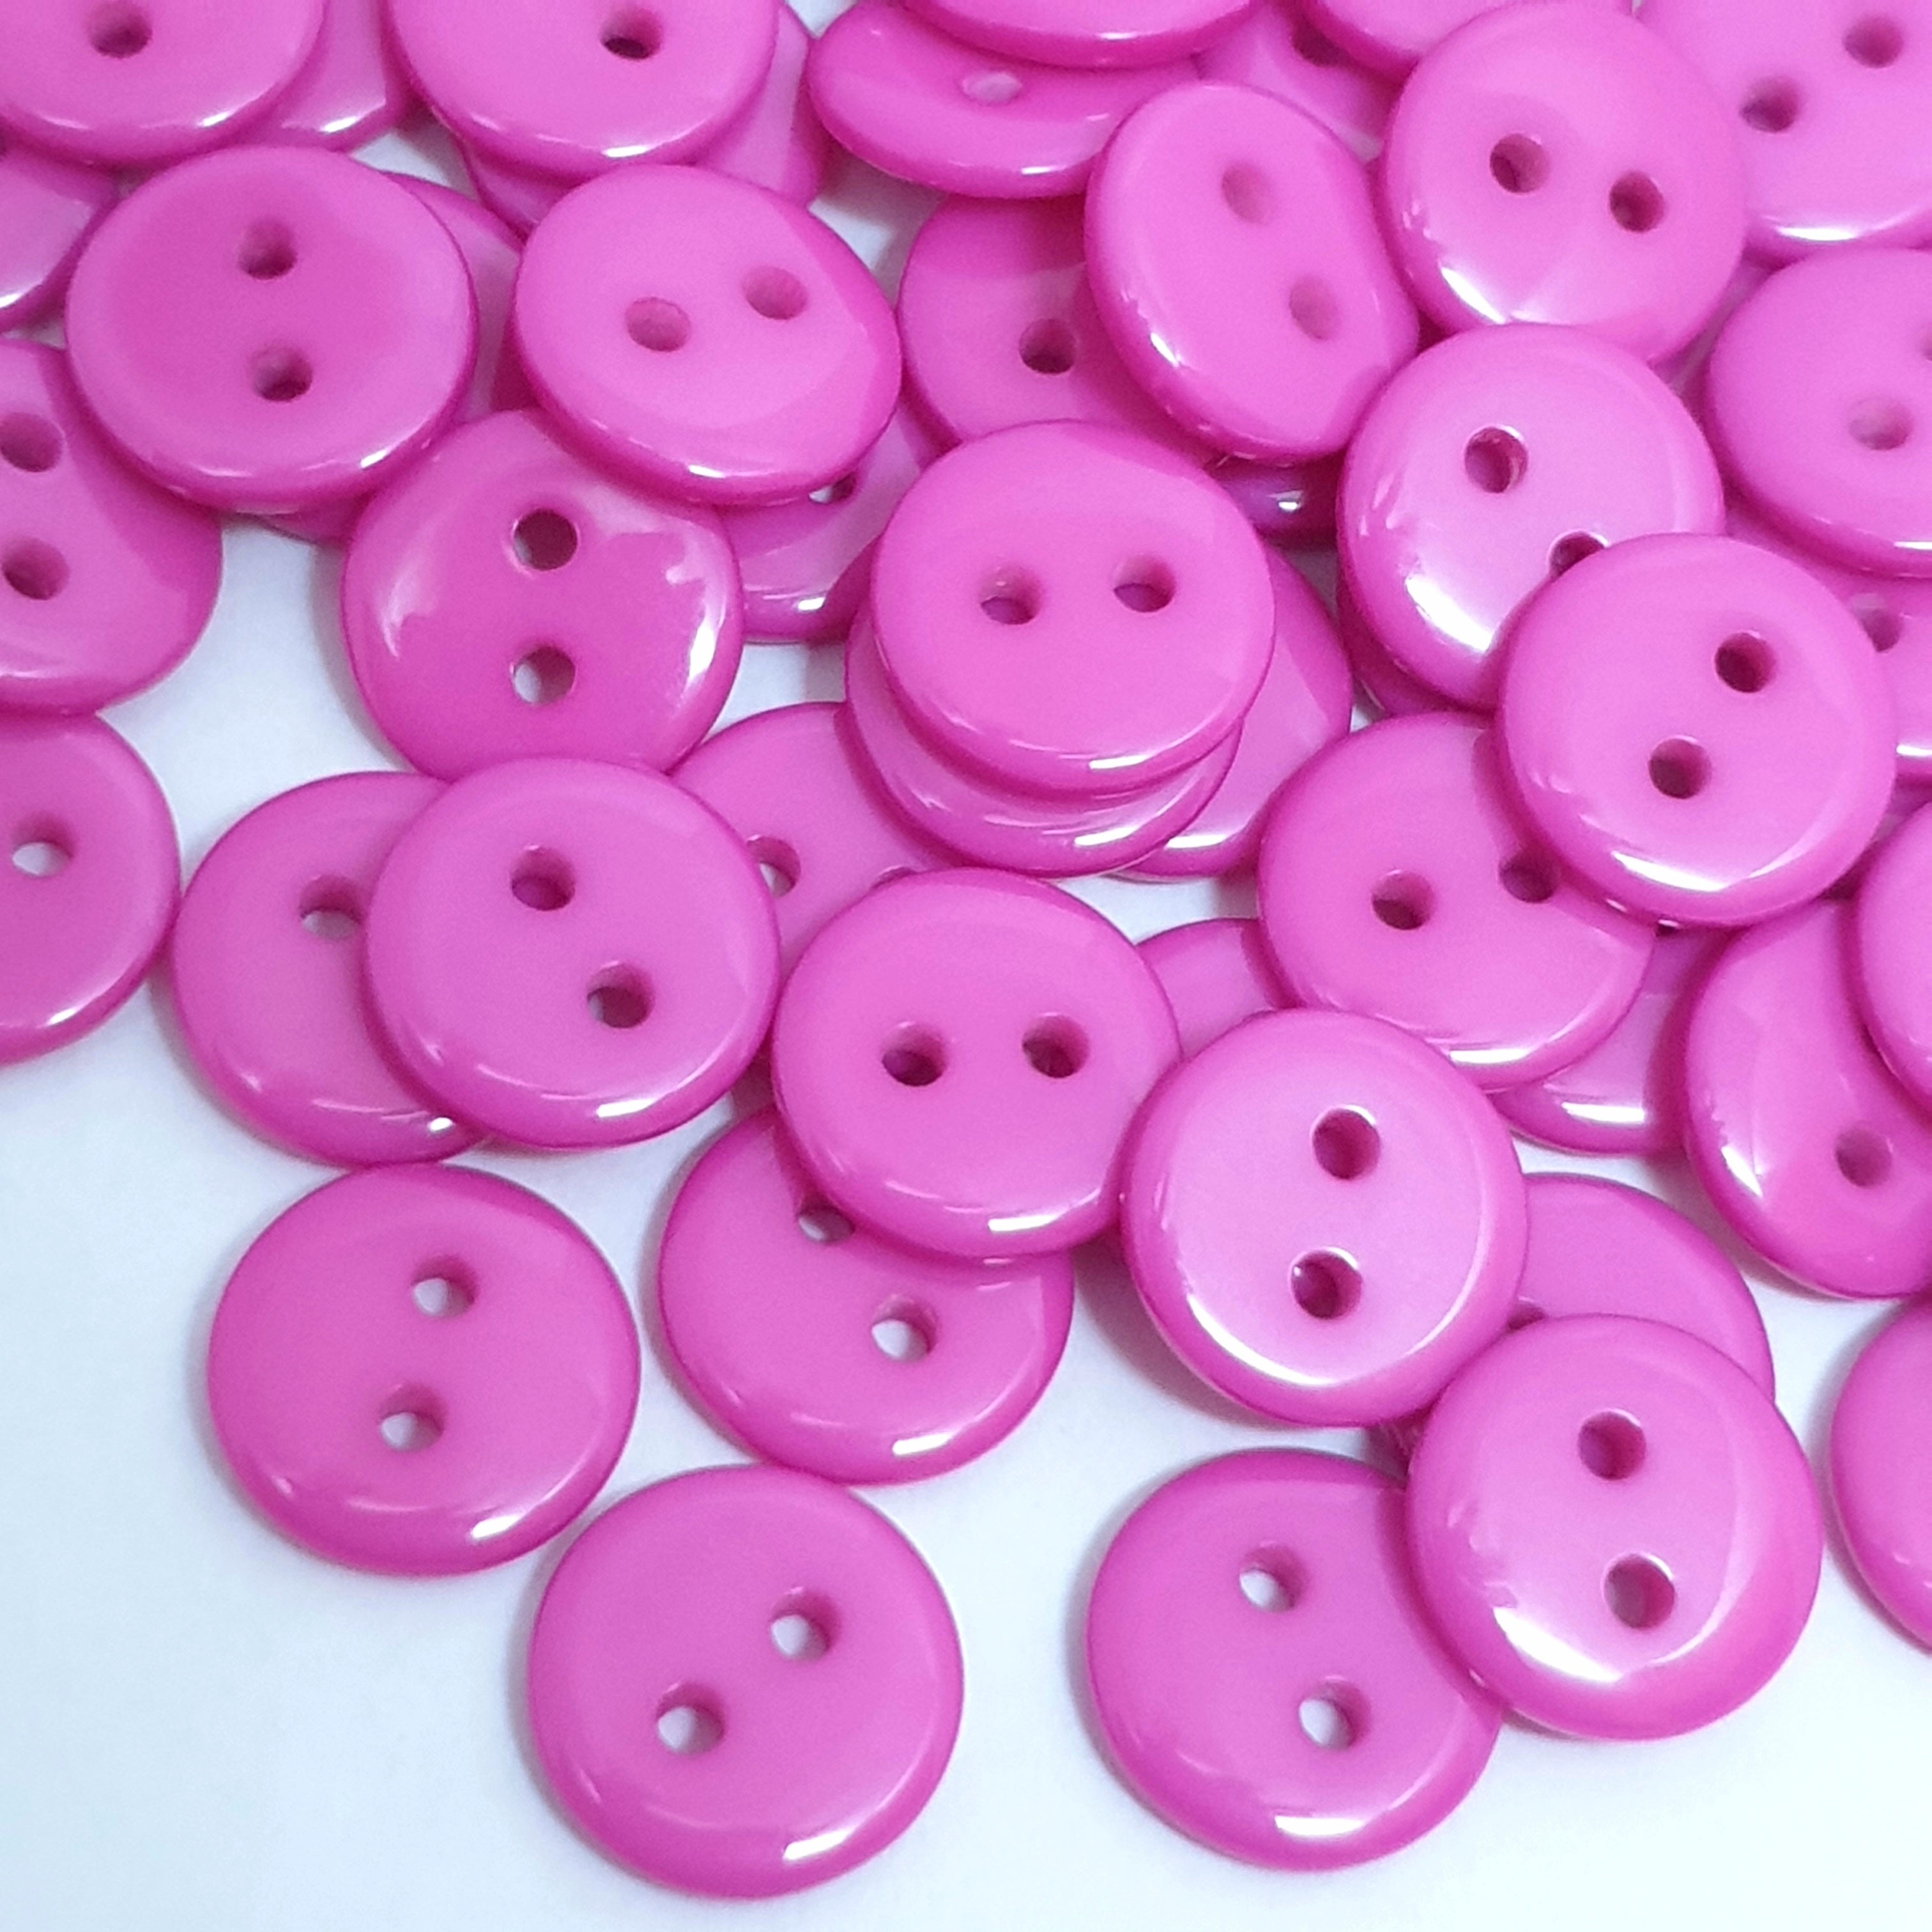 MajorCrafts 120pcs 9mm Dark Pink Small 2 Holes Round Resin Sewing Buttons B06